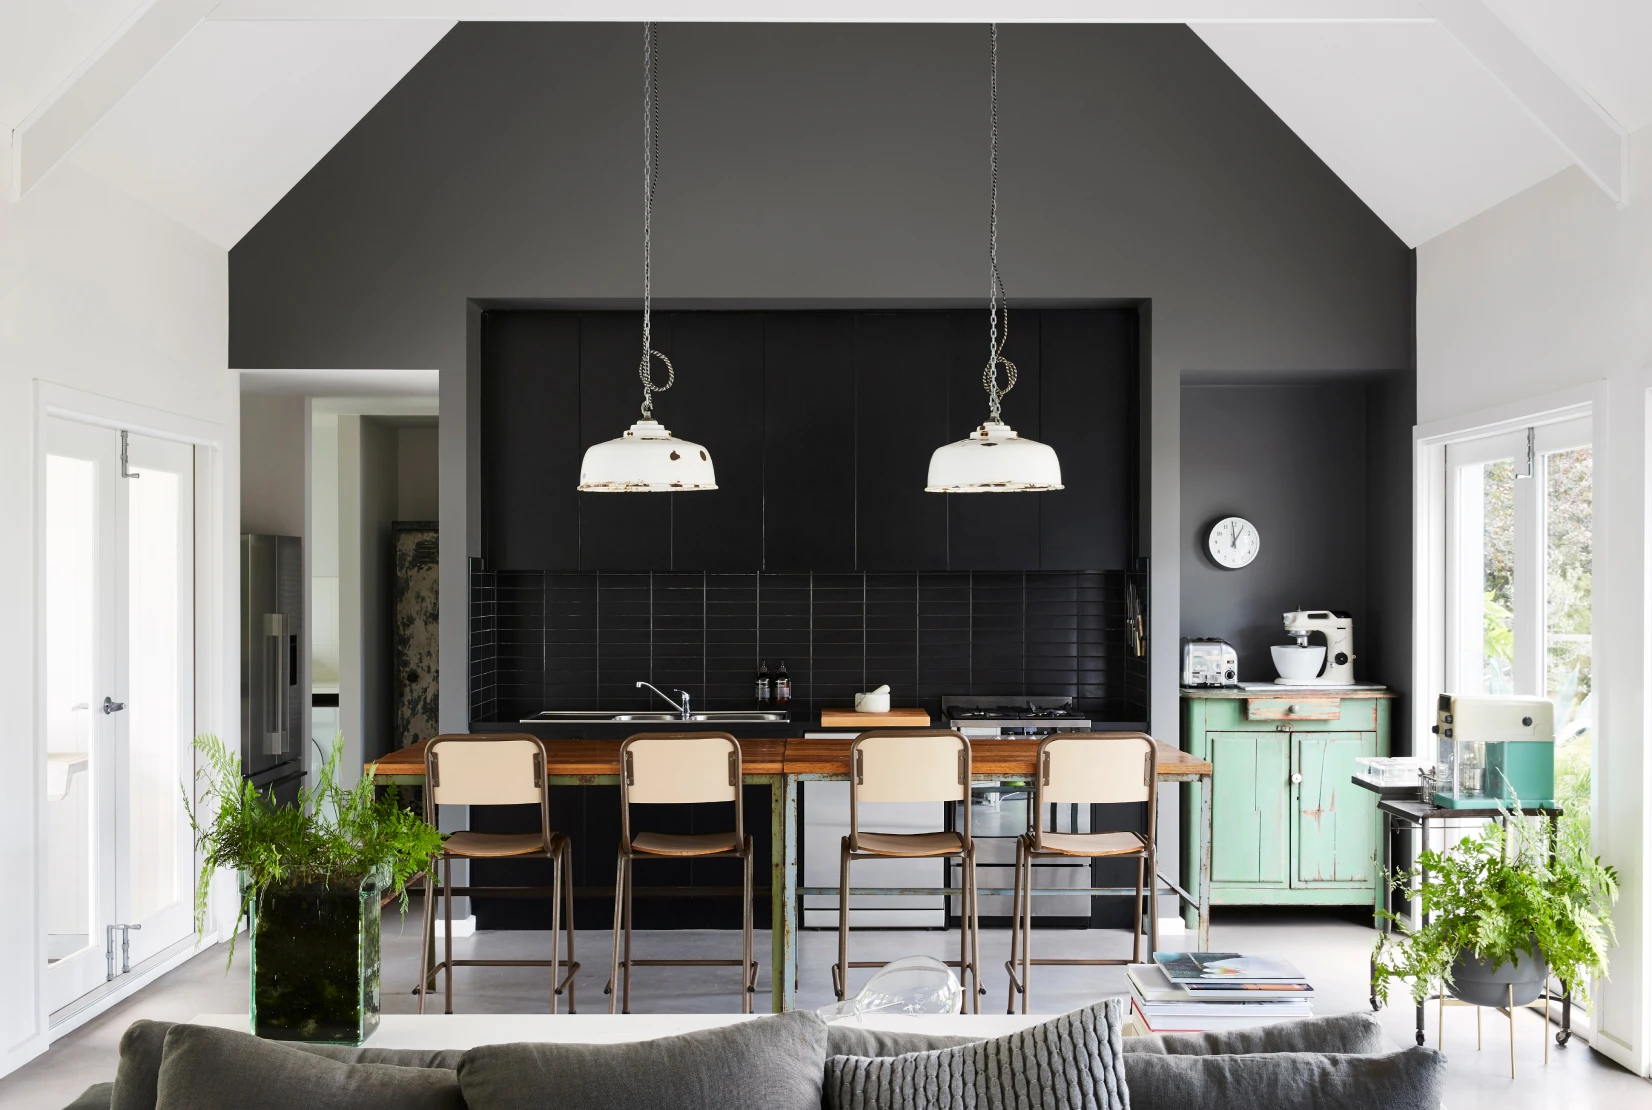 Kitchen and Dining room with grey colour feature wall, white side walls and vaulted ceilings.